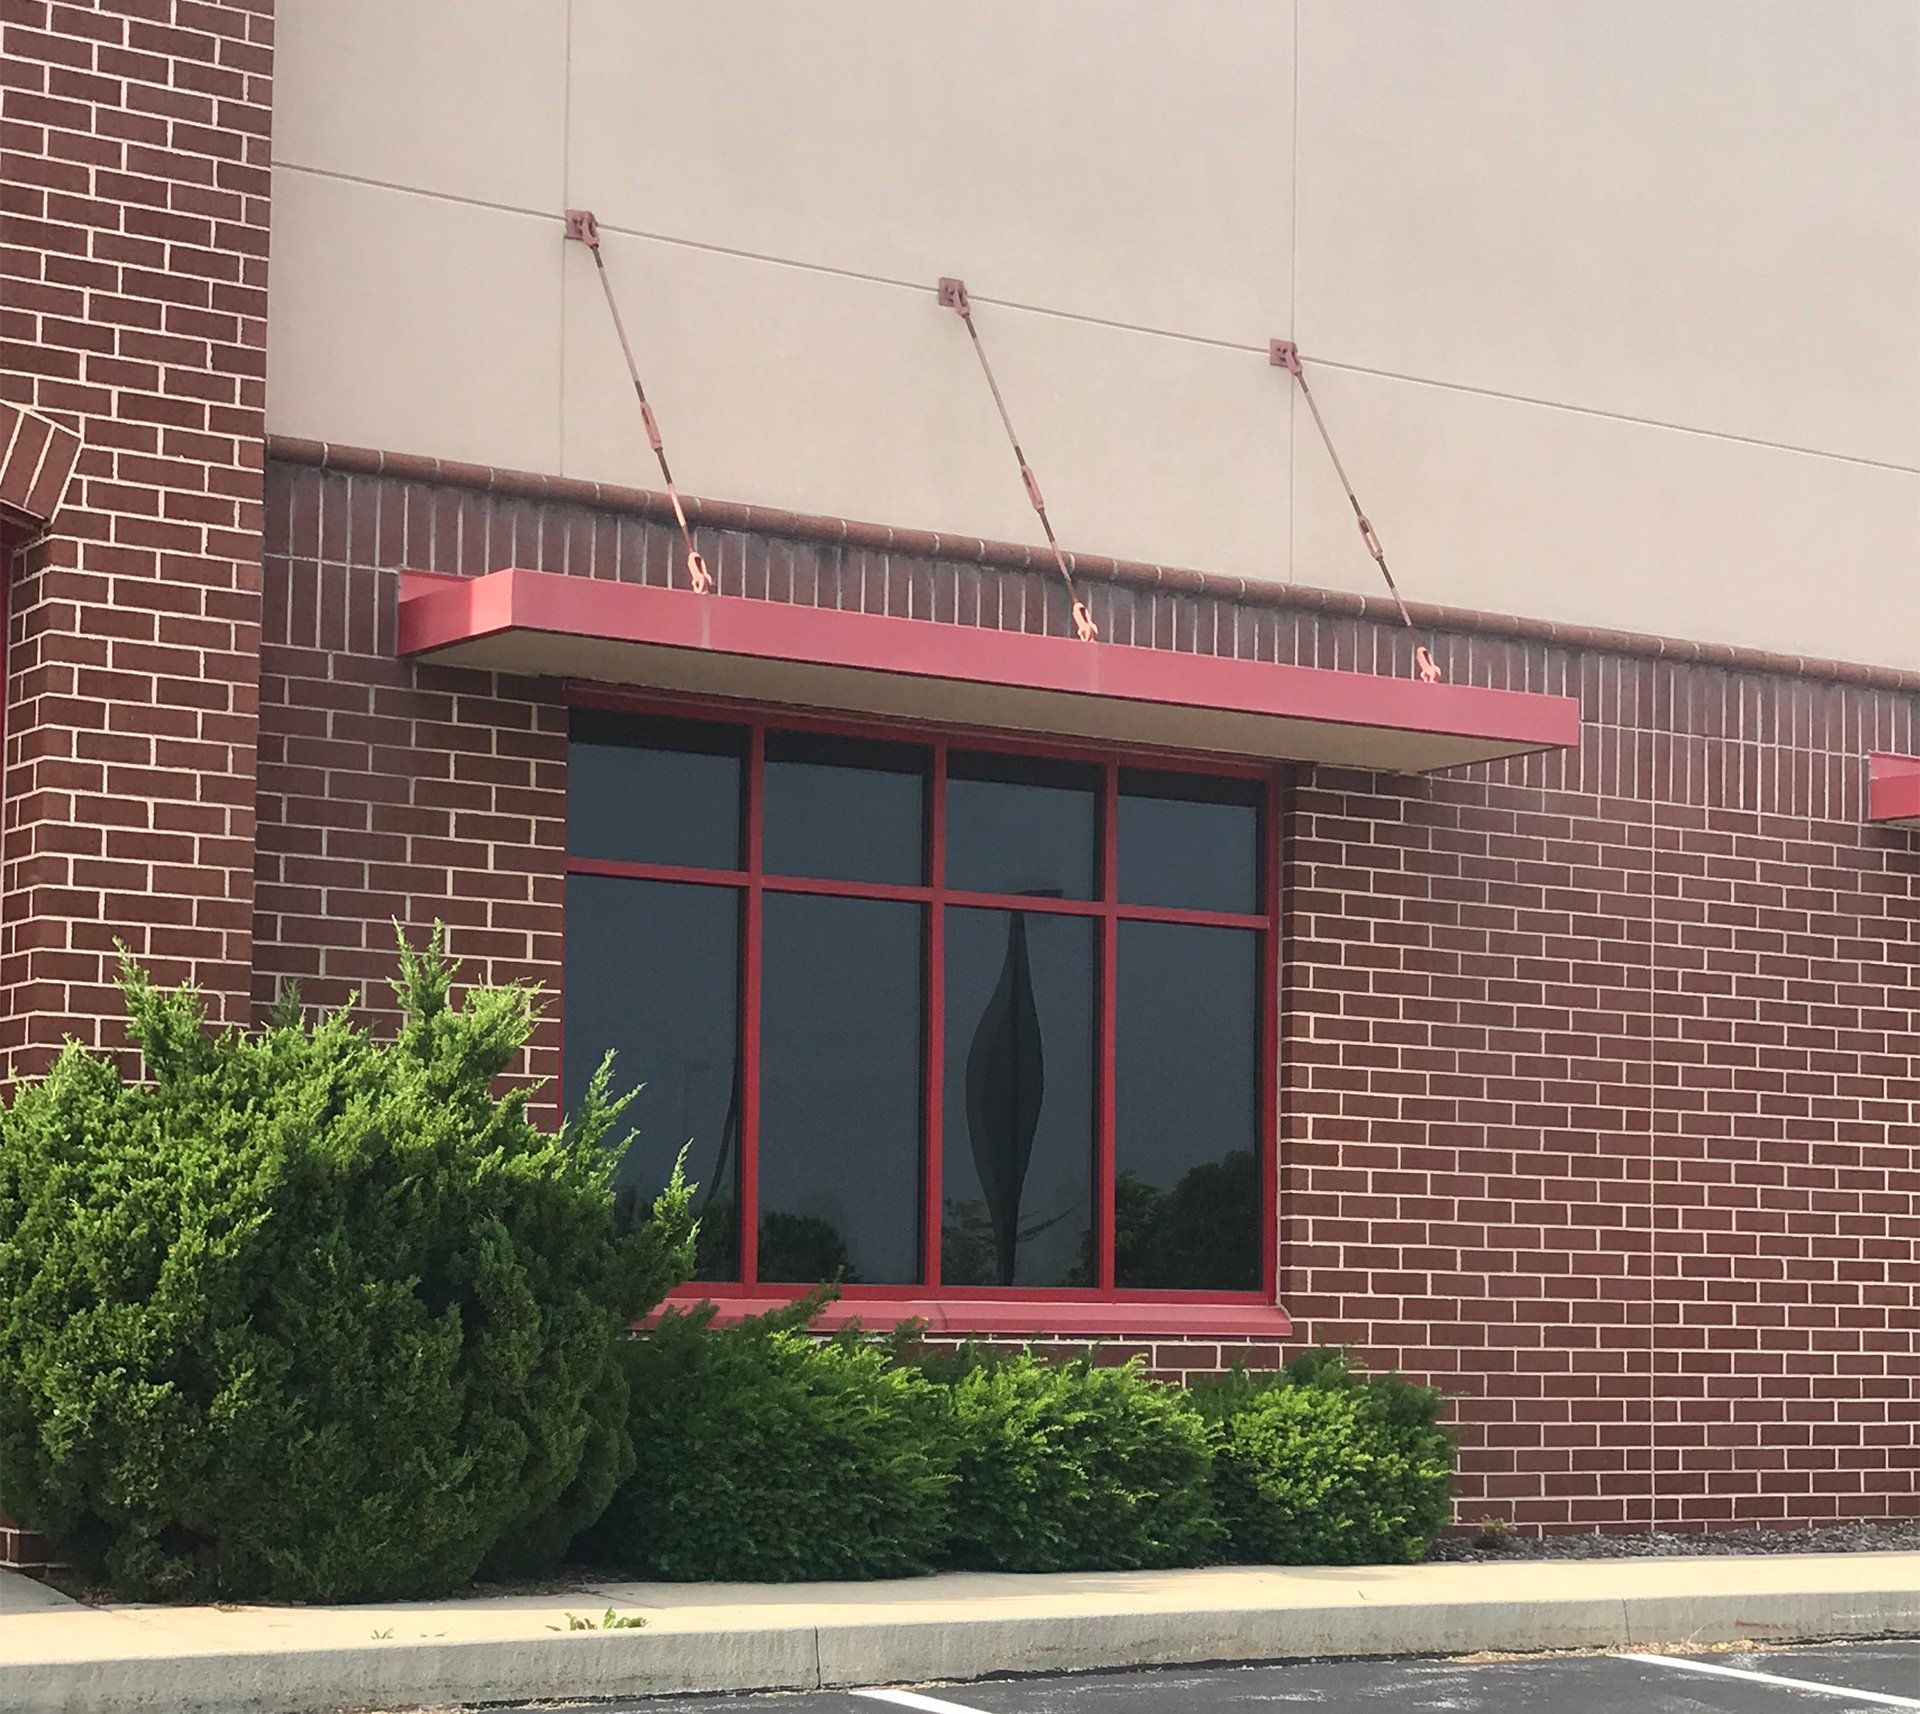 Commercial Glass — Double Glazing Thermal Pane Glass in Chester County, PA